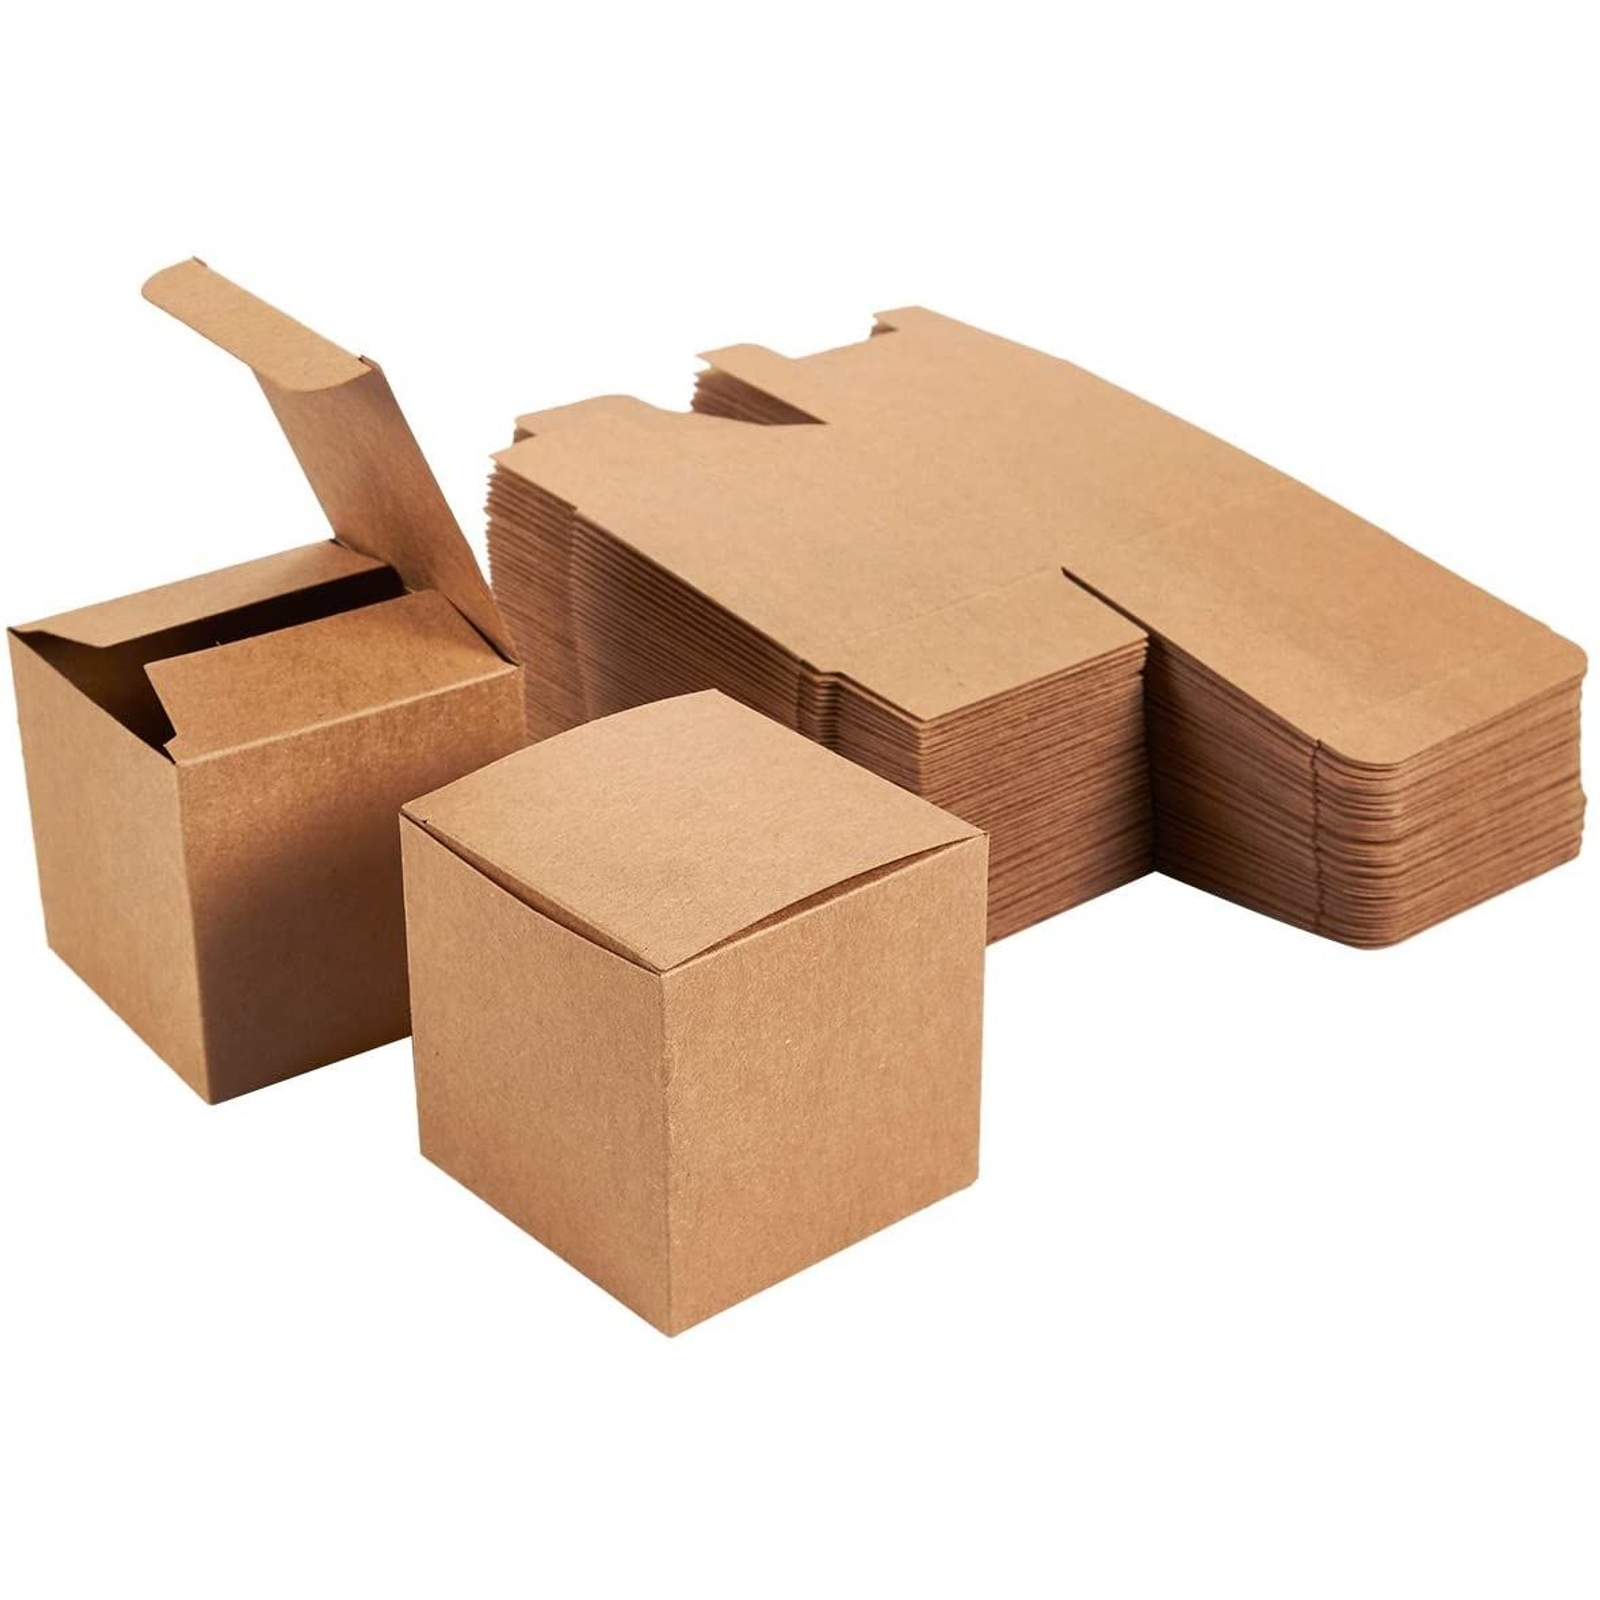 Premium Kraft Gift Boxes 50 Pack 3 x 3 x 3 inches Brown Paper Gift Boxes  with Lids for Gifts, Cupcake Boxes and Crafting, Easy Assemble Boxes